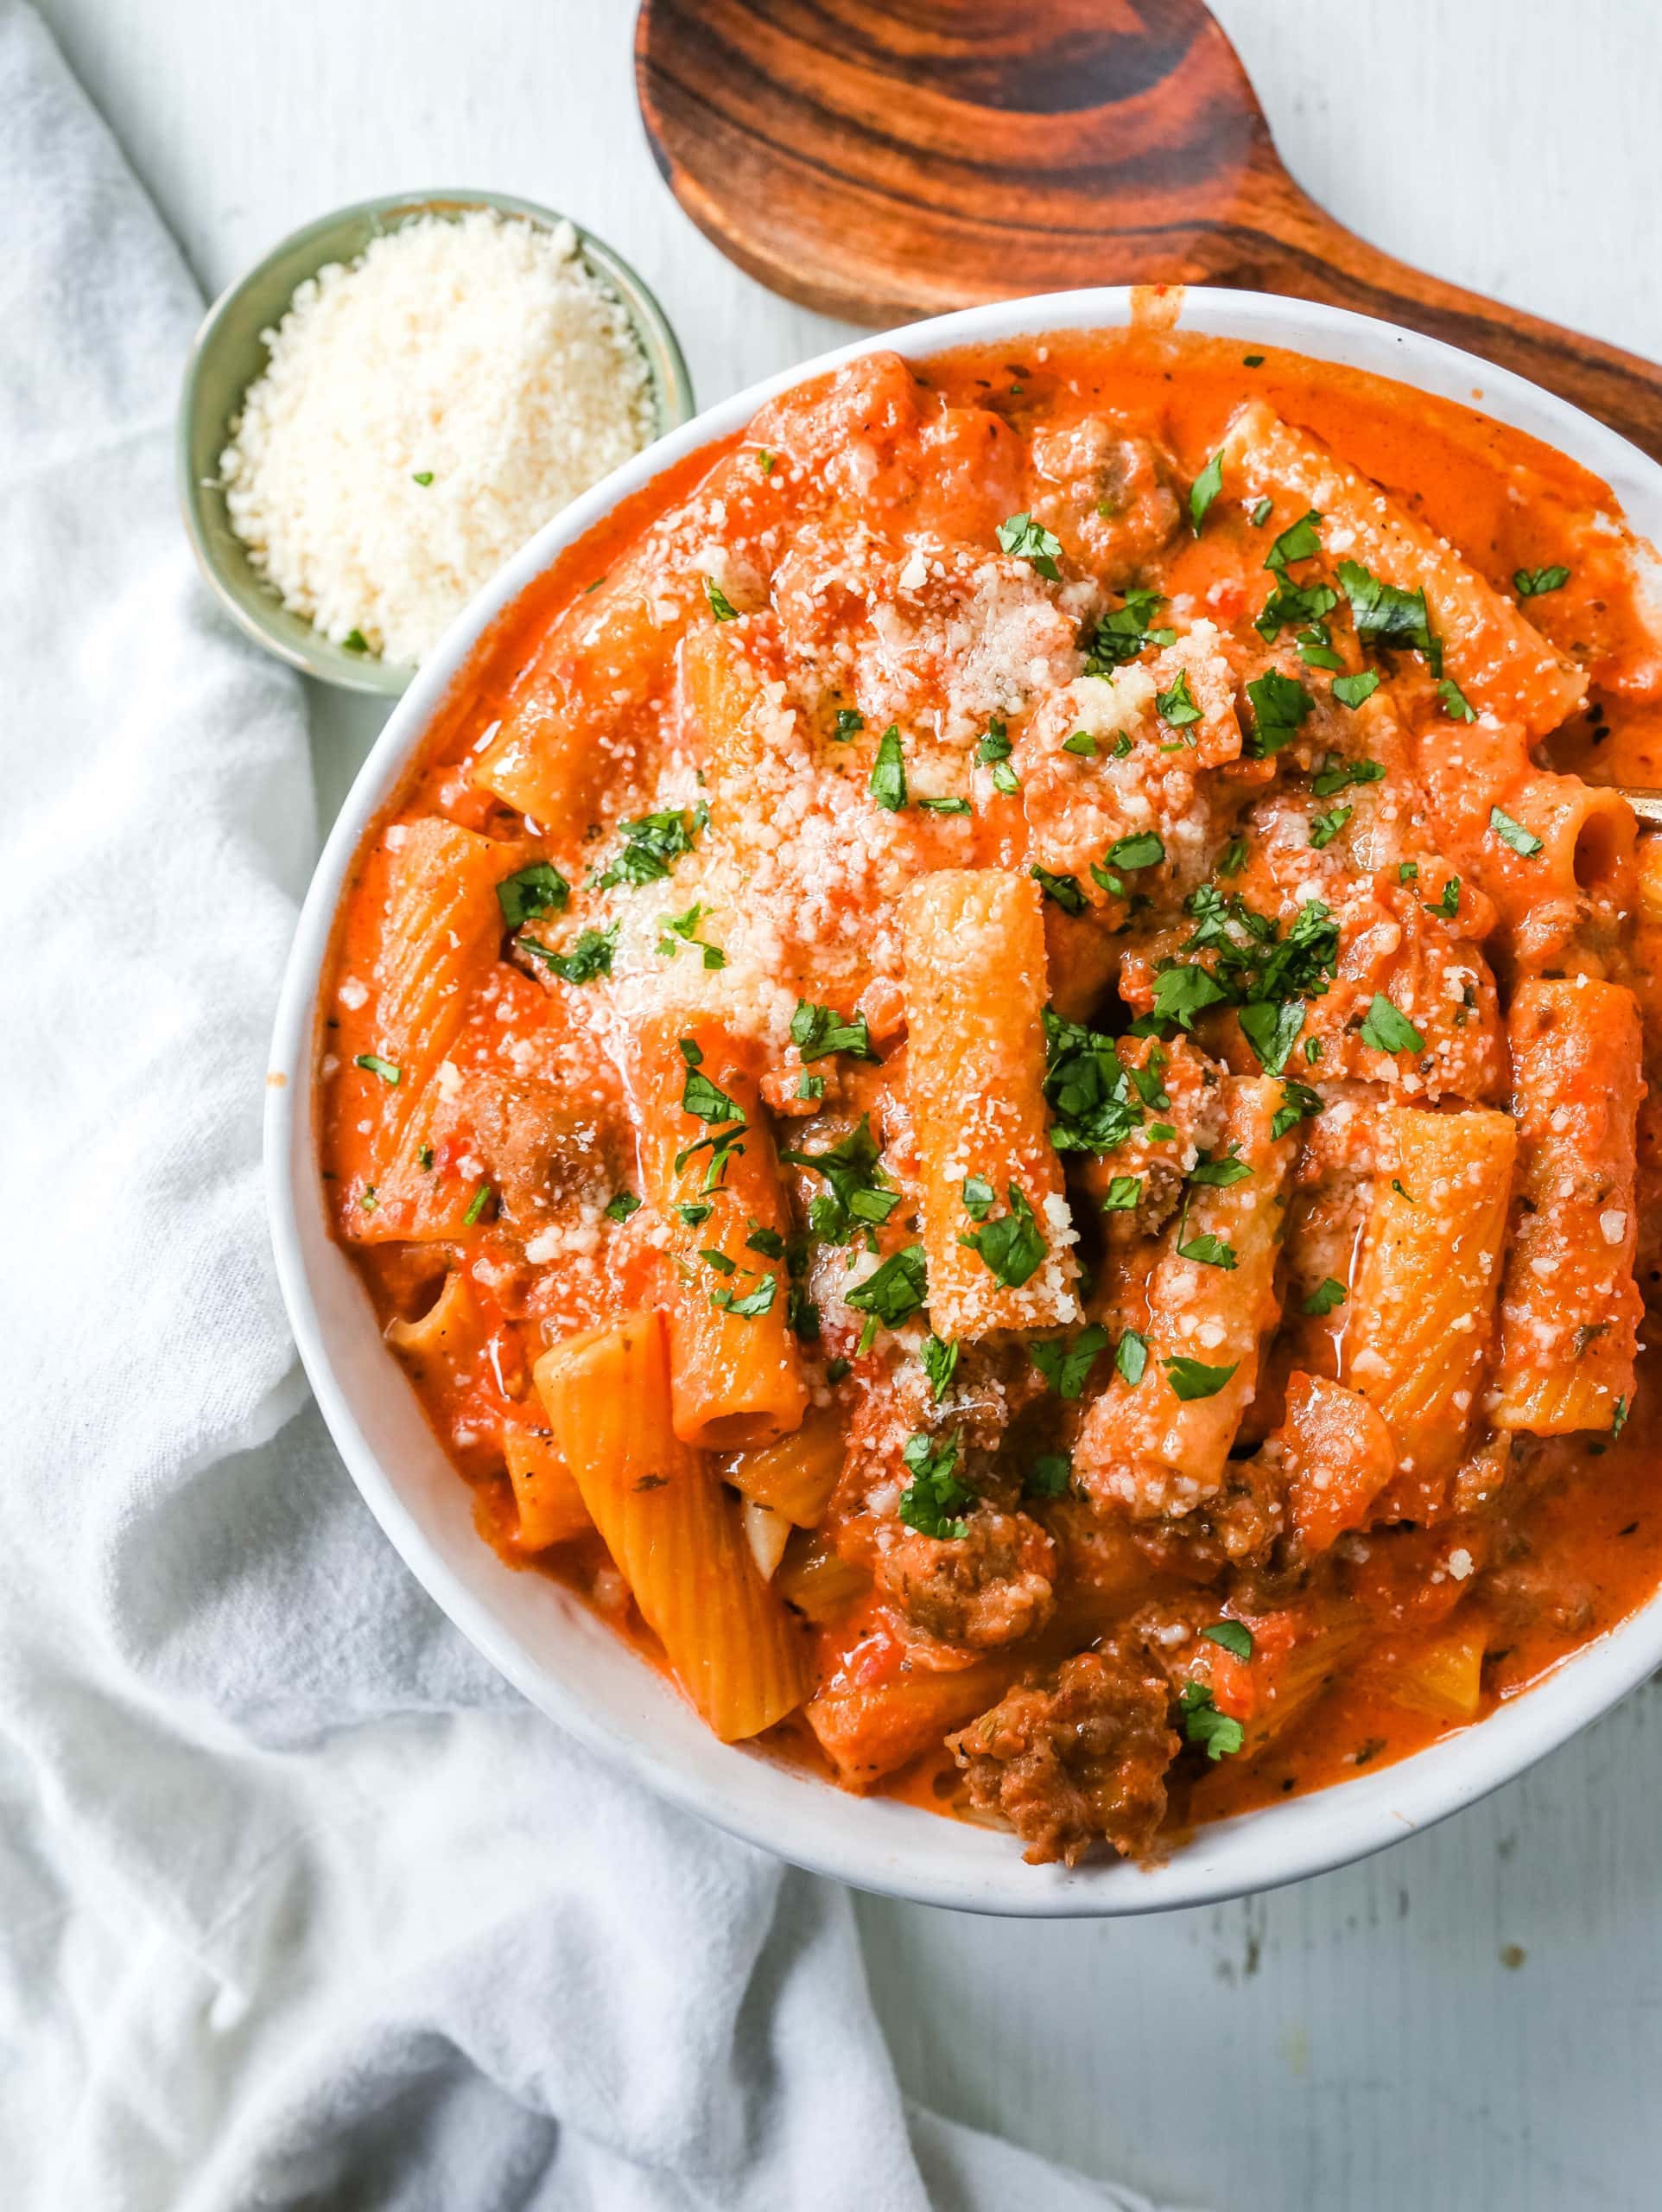 "Date Me" Creamy Sausage Rigatoni Pasta Homemade rich and creamy tomato cream and sausage sauce tossed with rigatoni and topped with parmesan cheese. The best creamy sausage rigatoni pasta! #pasta #dinner